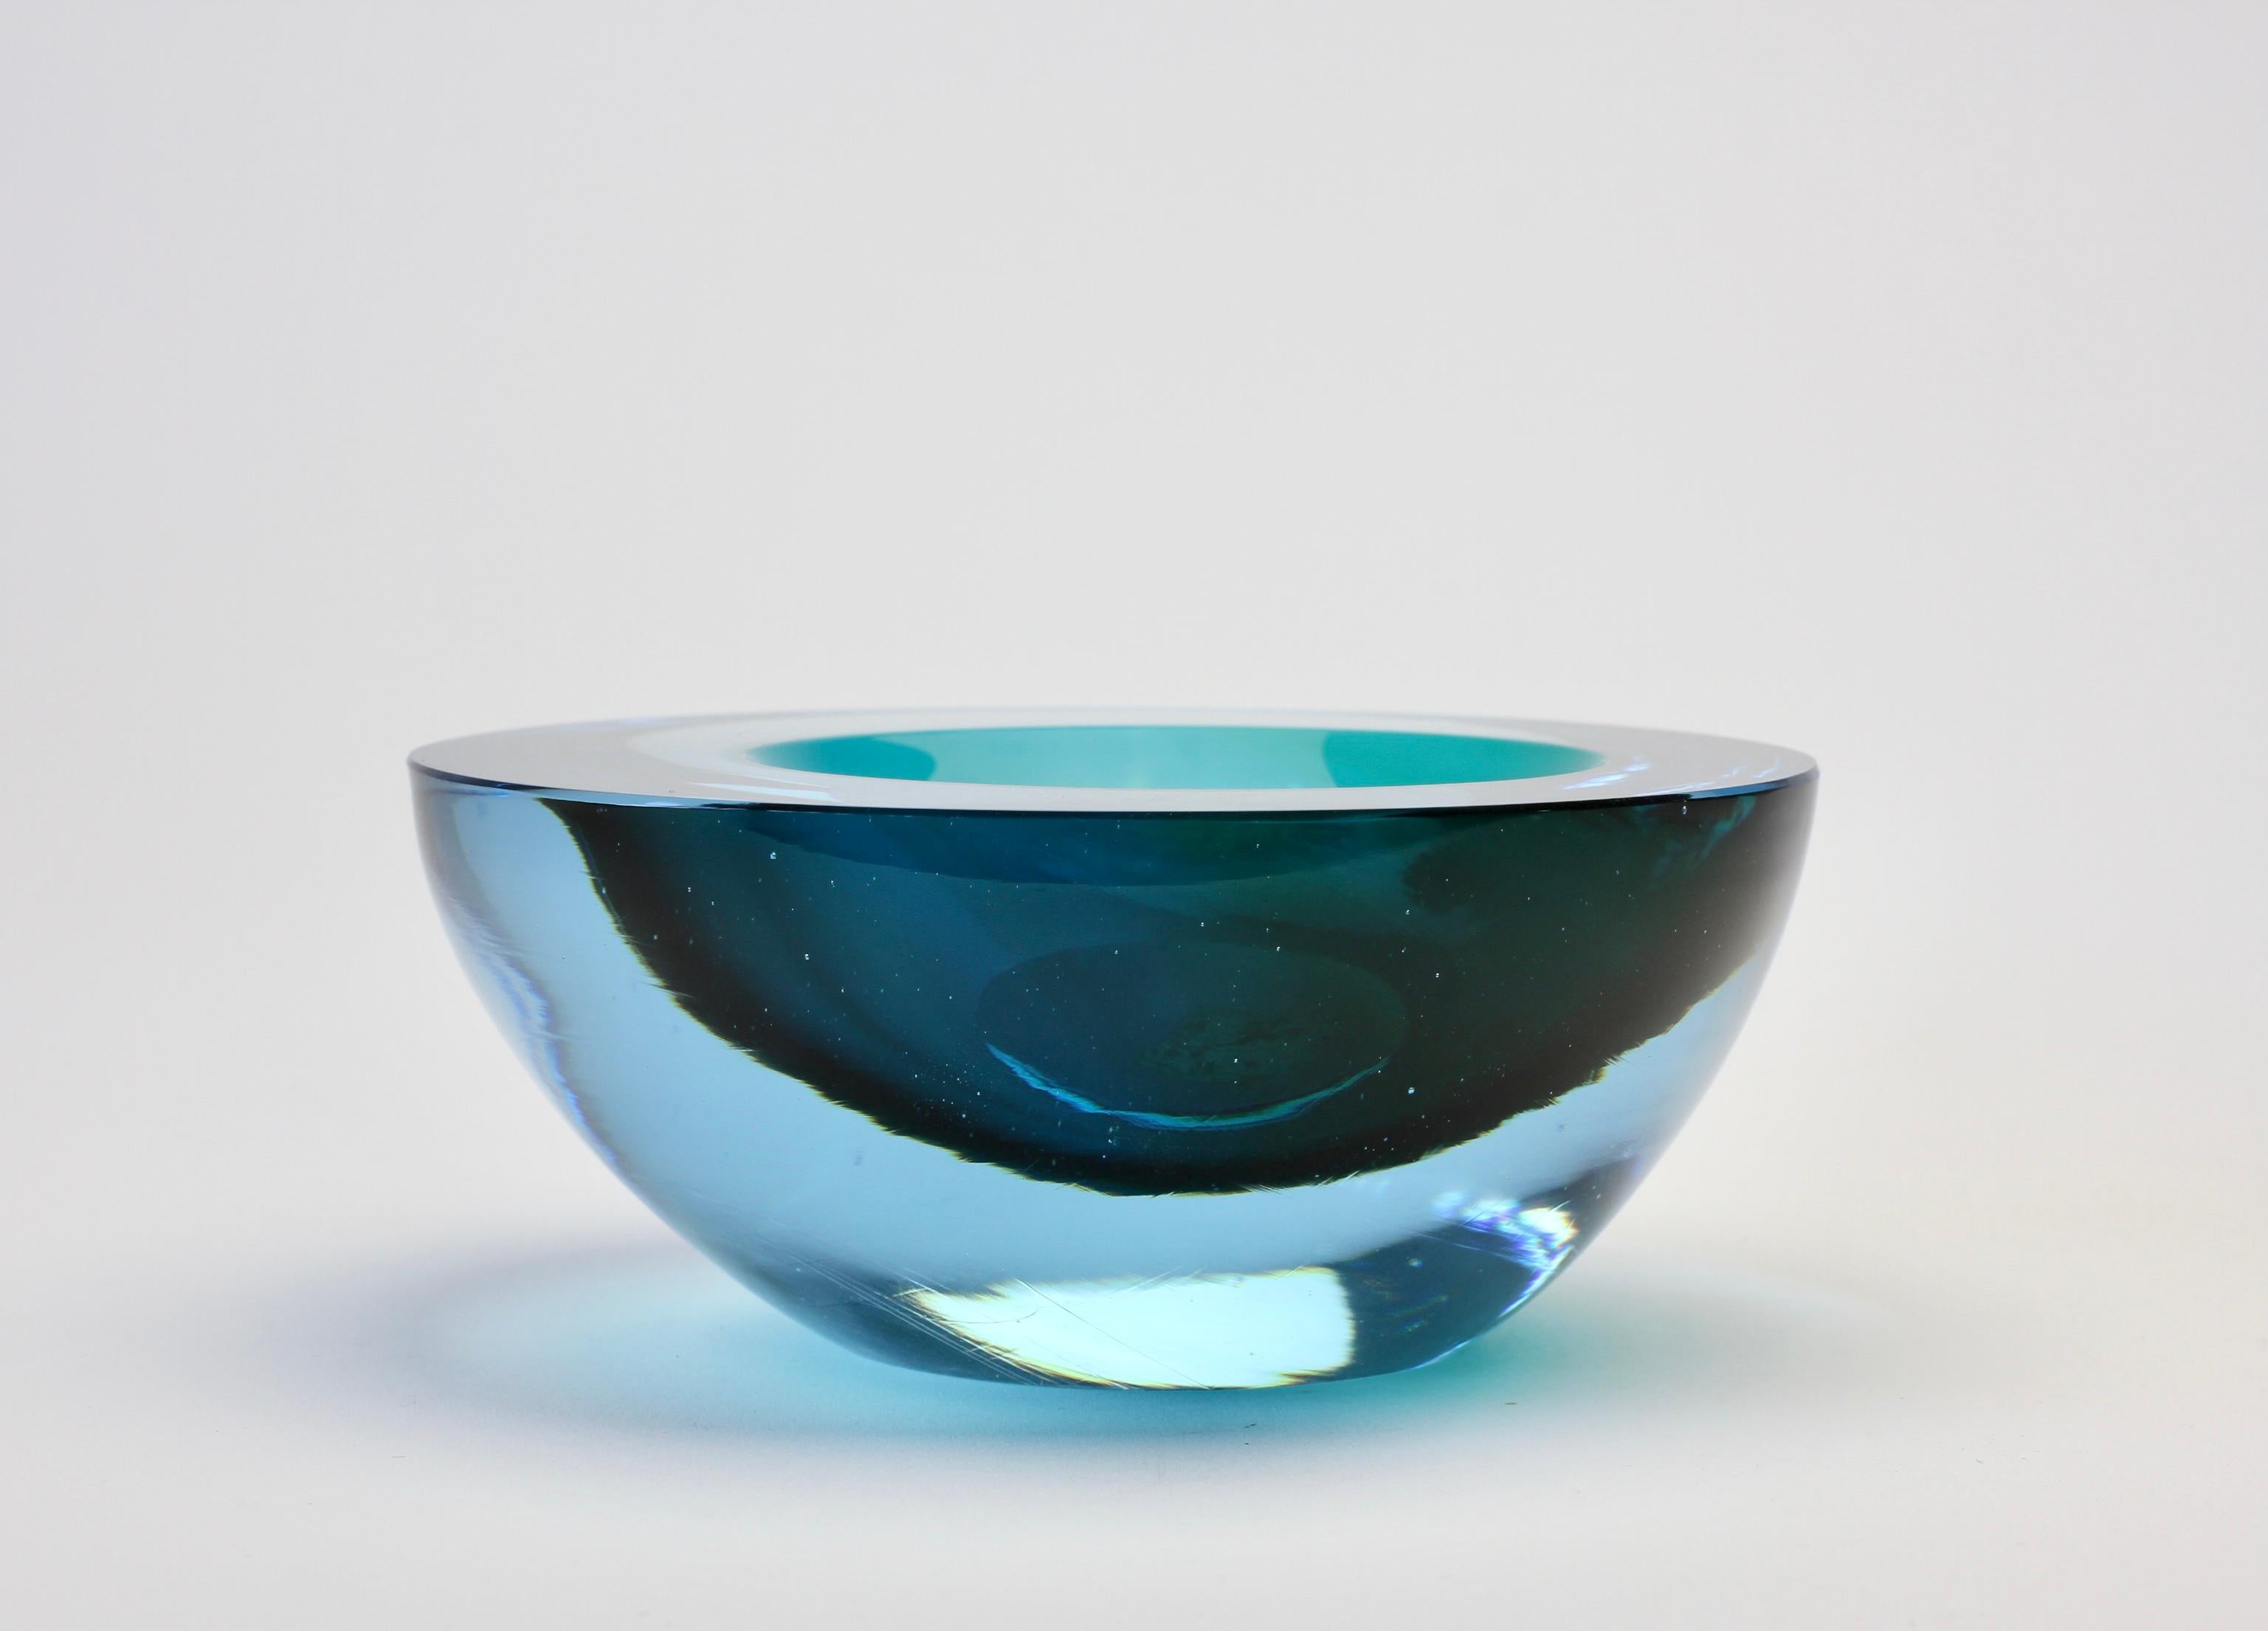 Large Cenedese Italian Asymmetric Blue Sommerso Murano Glass Bowl, Dish, Ashtray For Sale 4